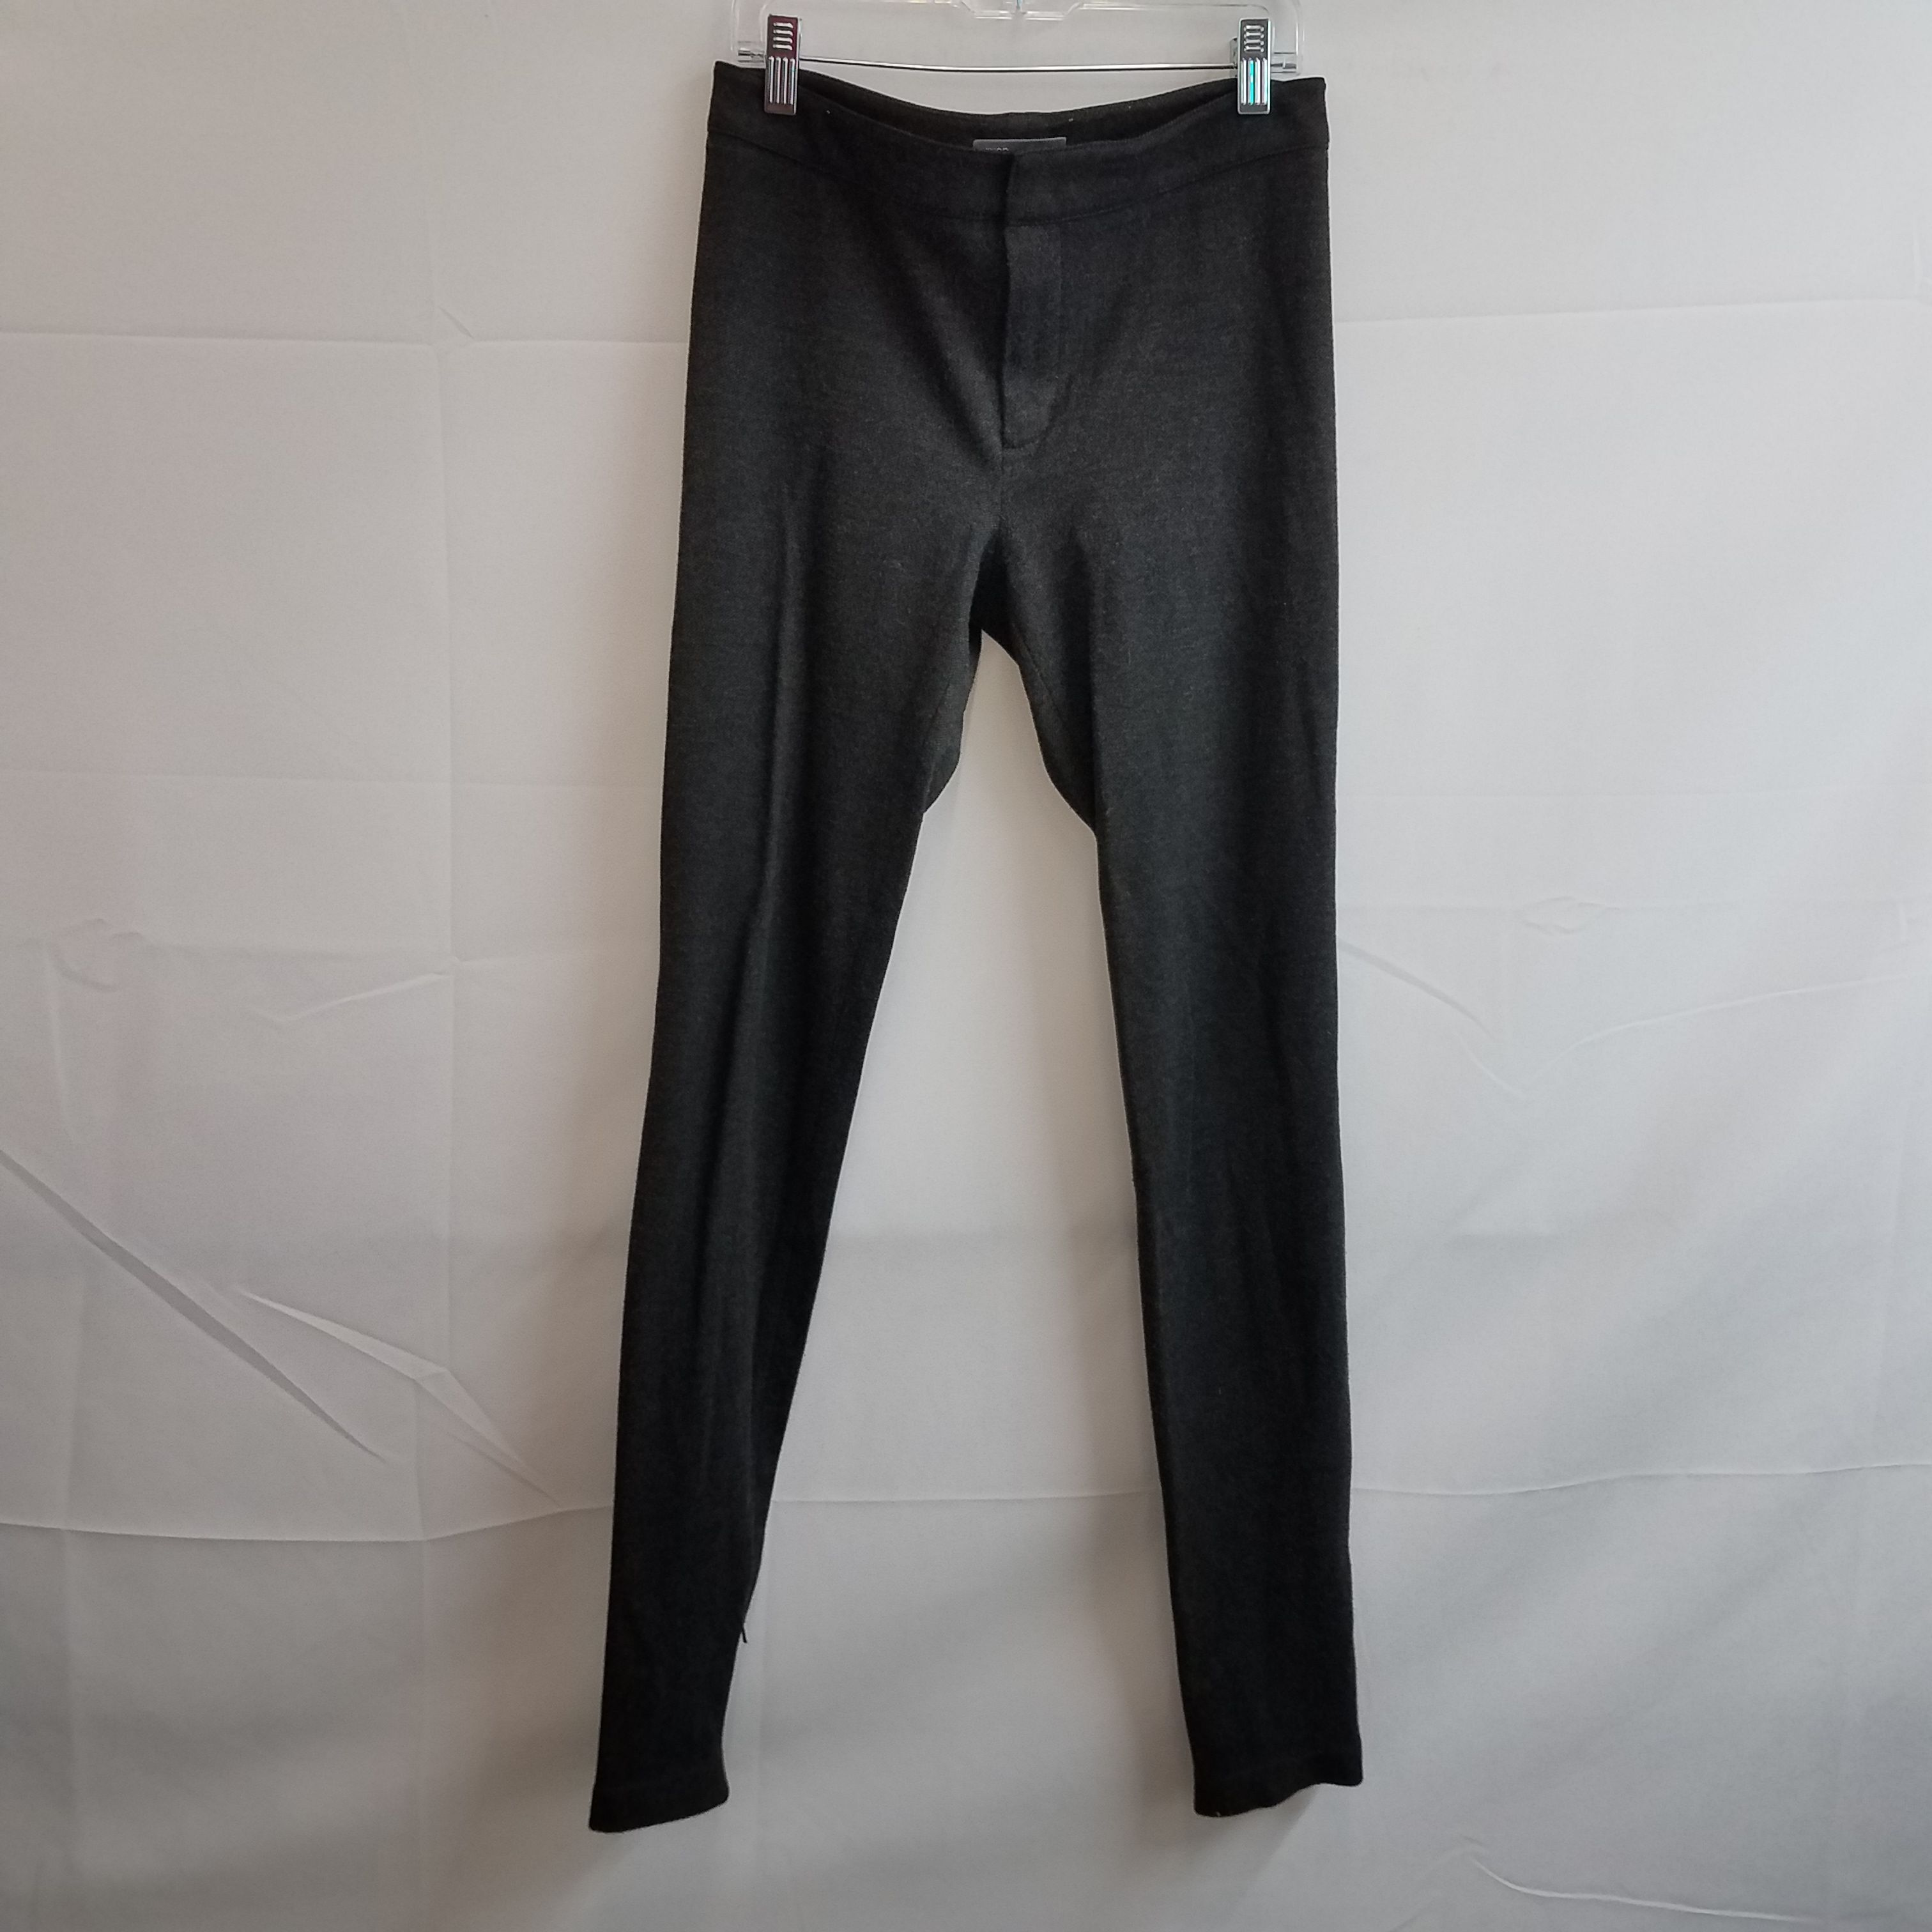 Womens Black Crop Ankle Pants Gold Zippers Ankle Zip Stretch 0 The Limited  90s | eBay